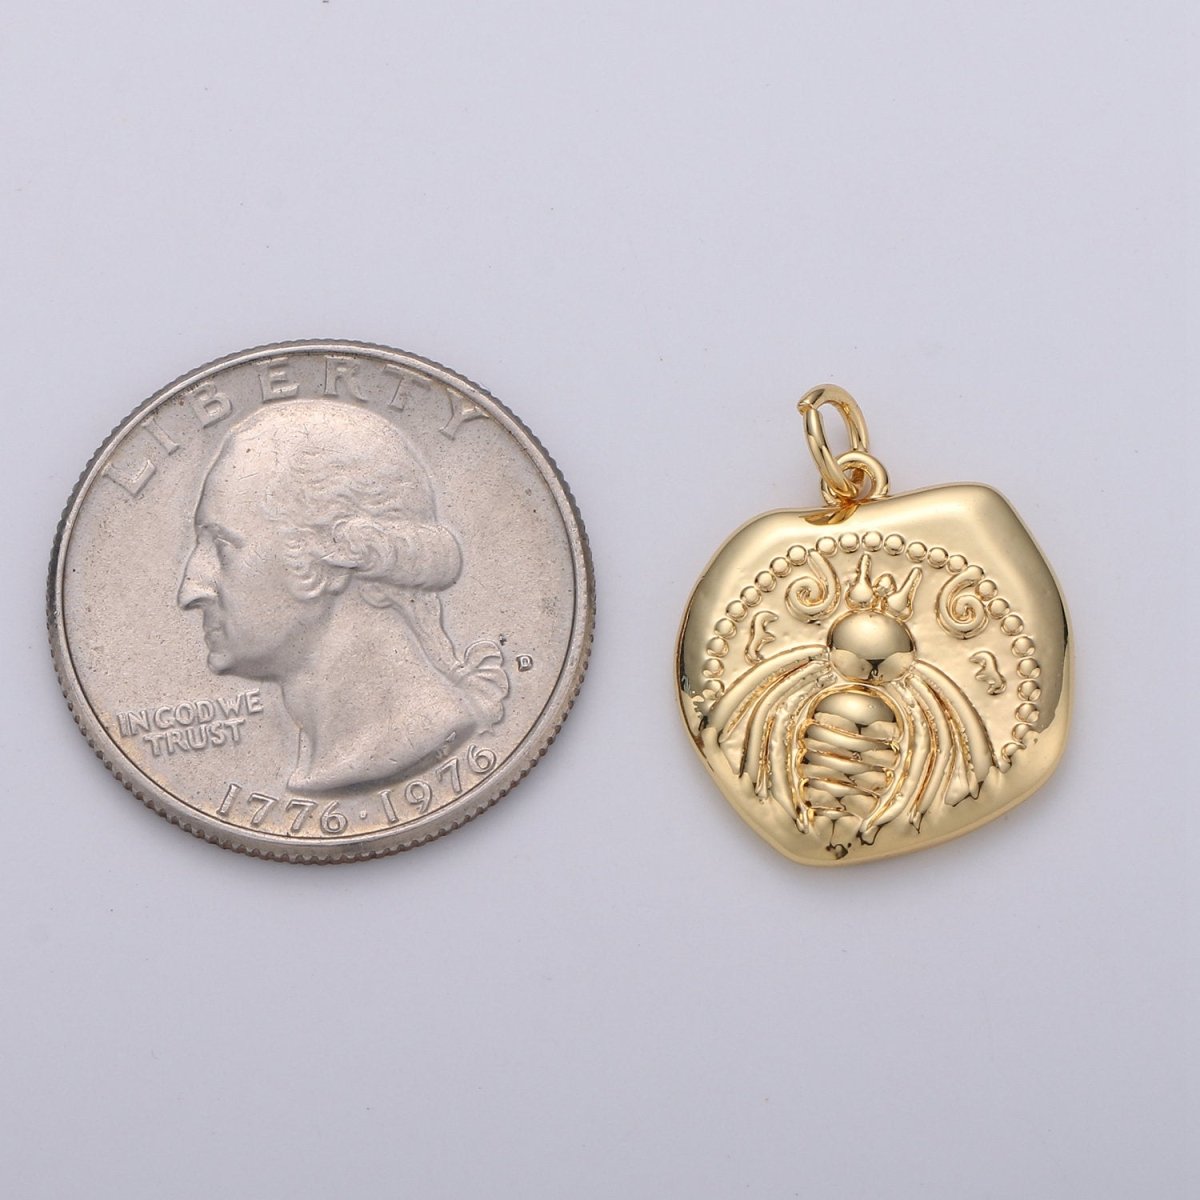 Gold Artemis Bee Coin Charm | Ancient Greek Coin Replica Pendant 14k Gold Filled Ephesus Bee Pendant Necklace | Roman Coin Jewelry Supply D-287 D-288 - DLUXCA